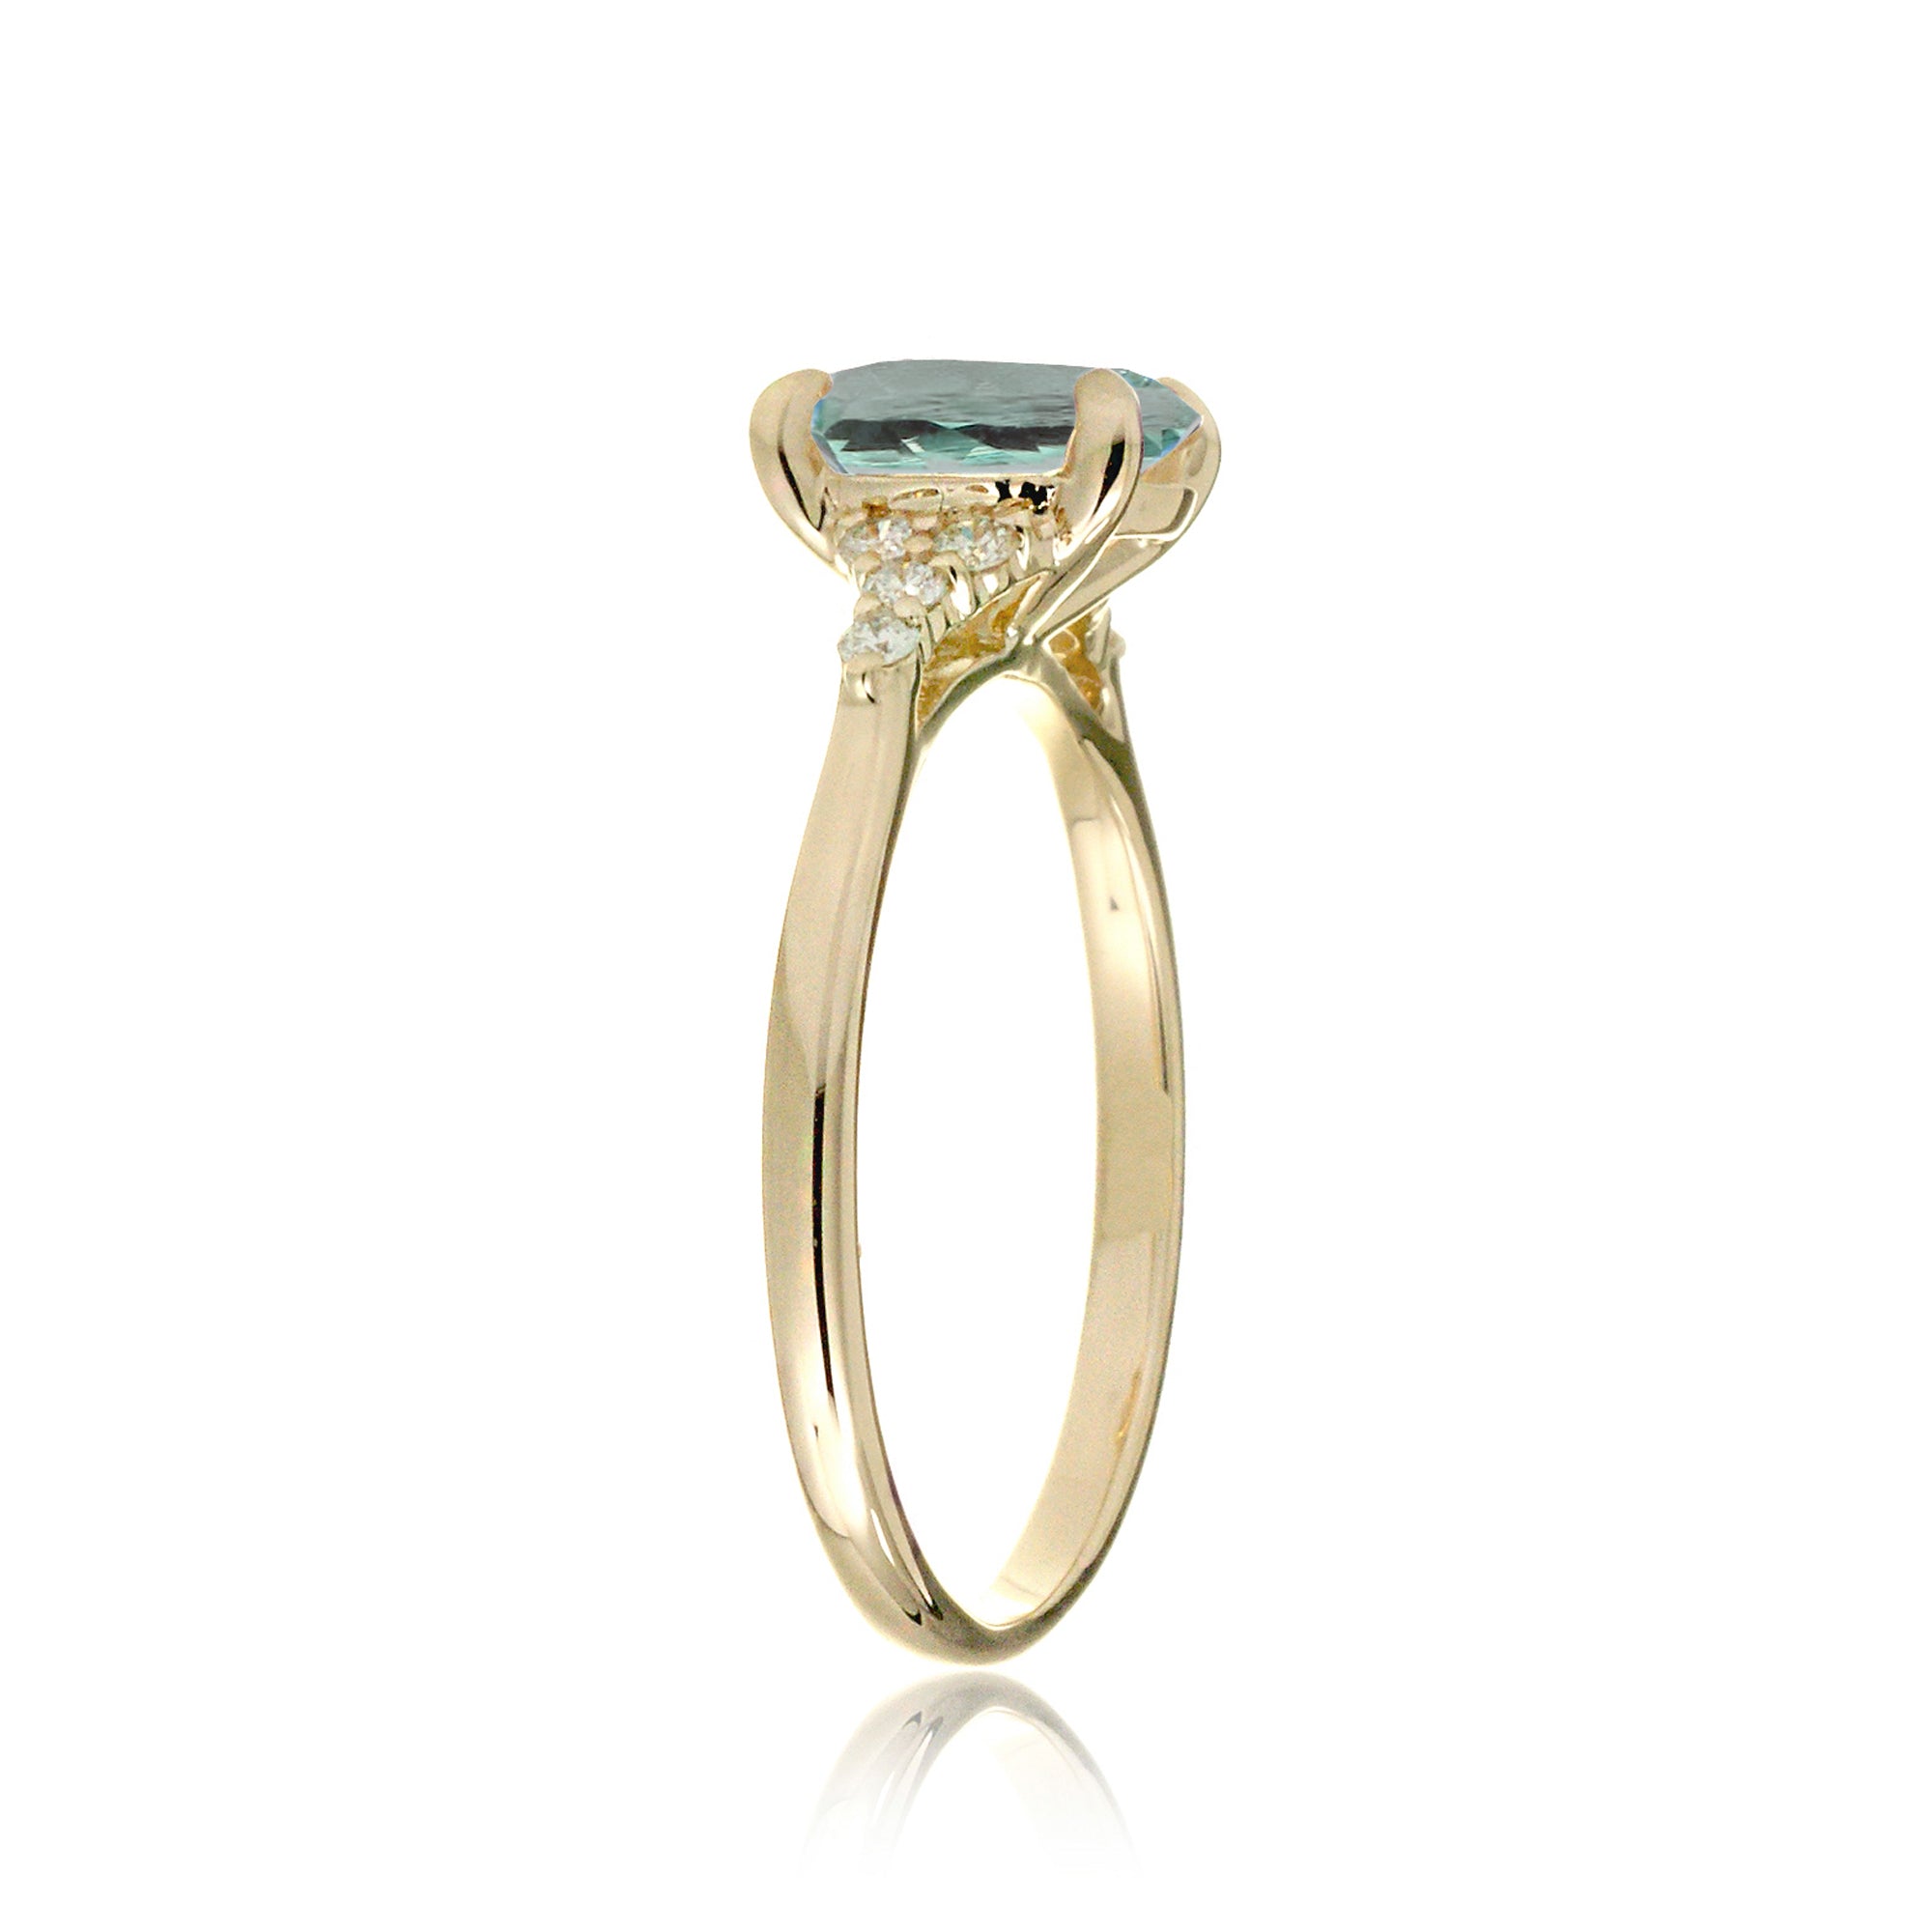 The Chloe Oval Green Sapphire Ring (Lab-Grown)